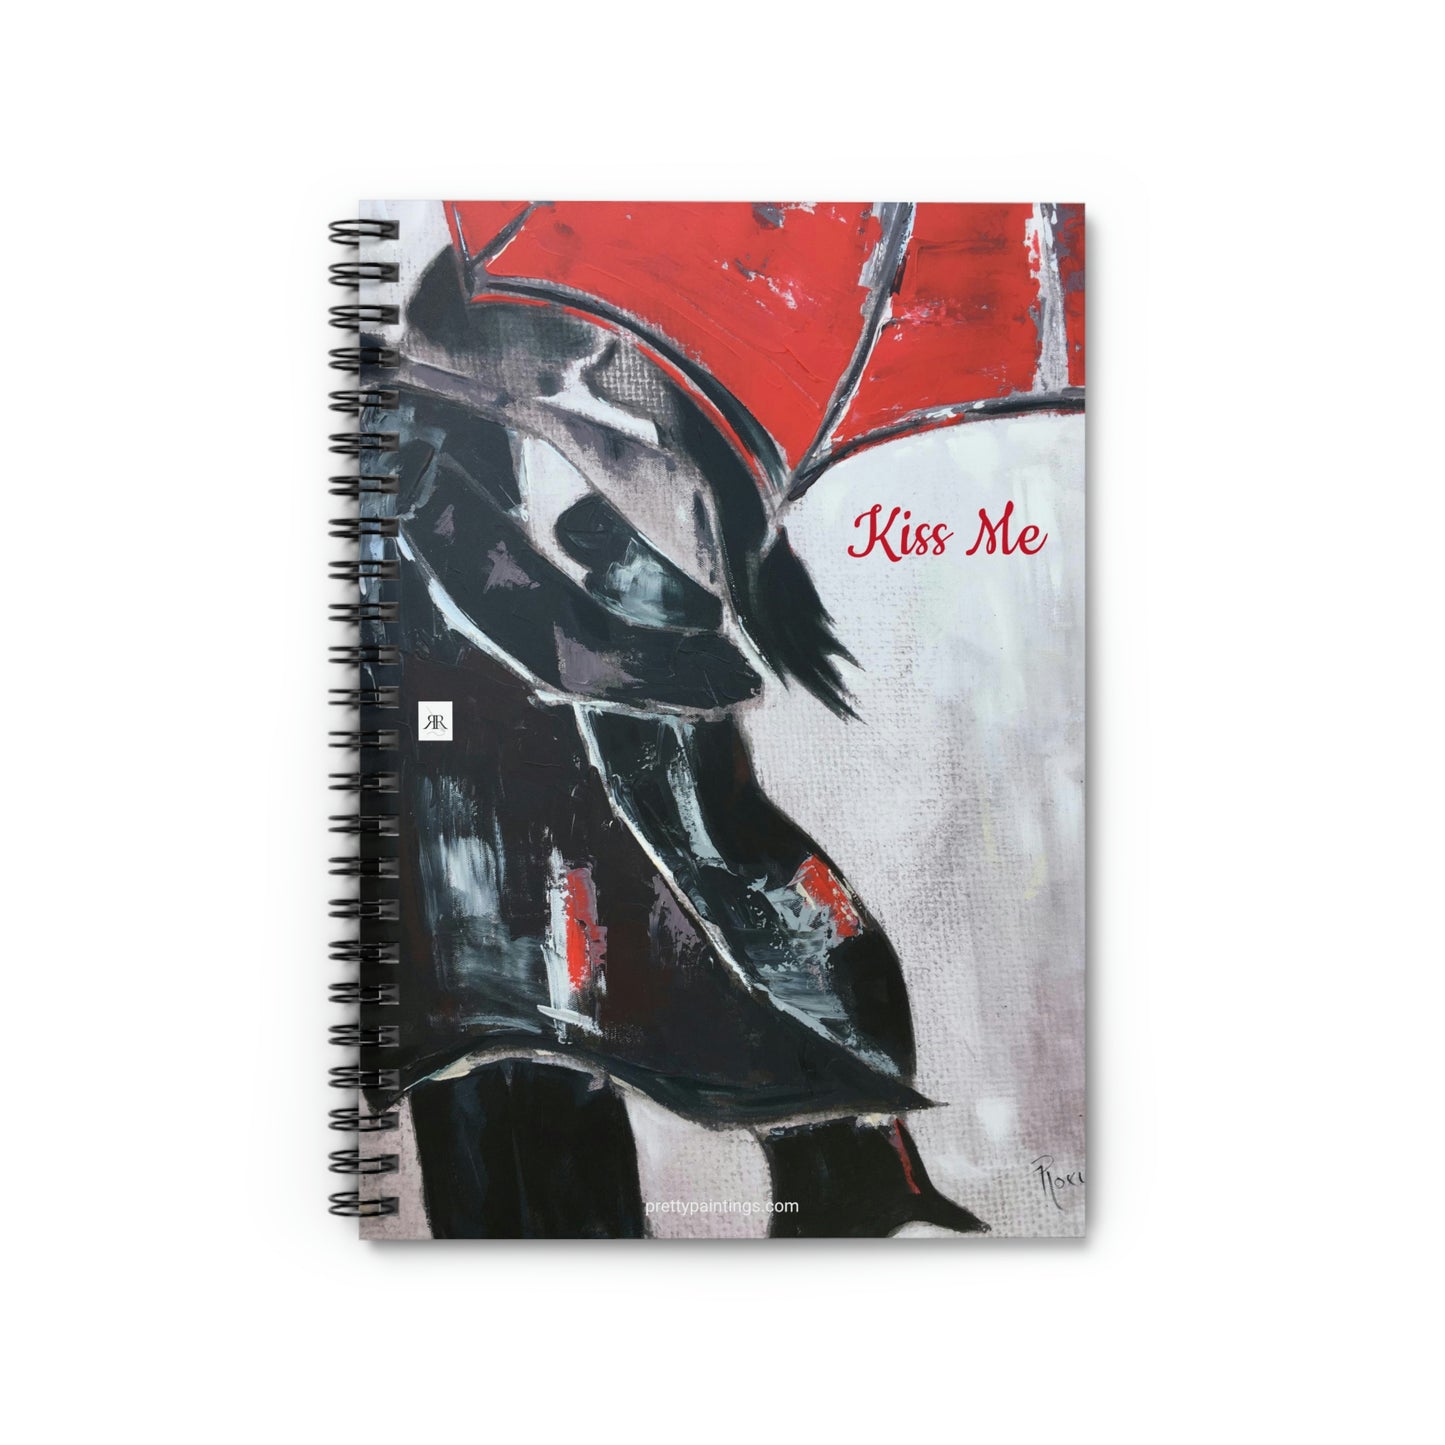 Romantic Couple under Red Umbrella "Kiss Me" Spiral Notebook